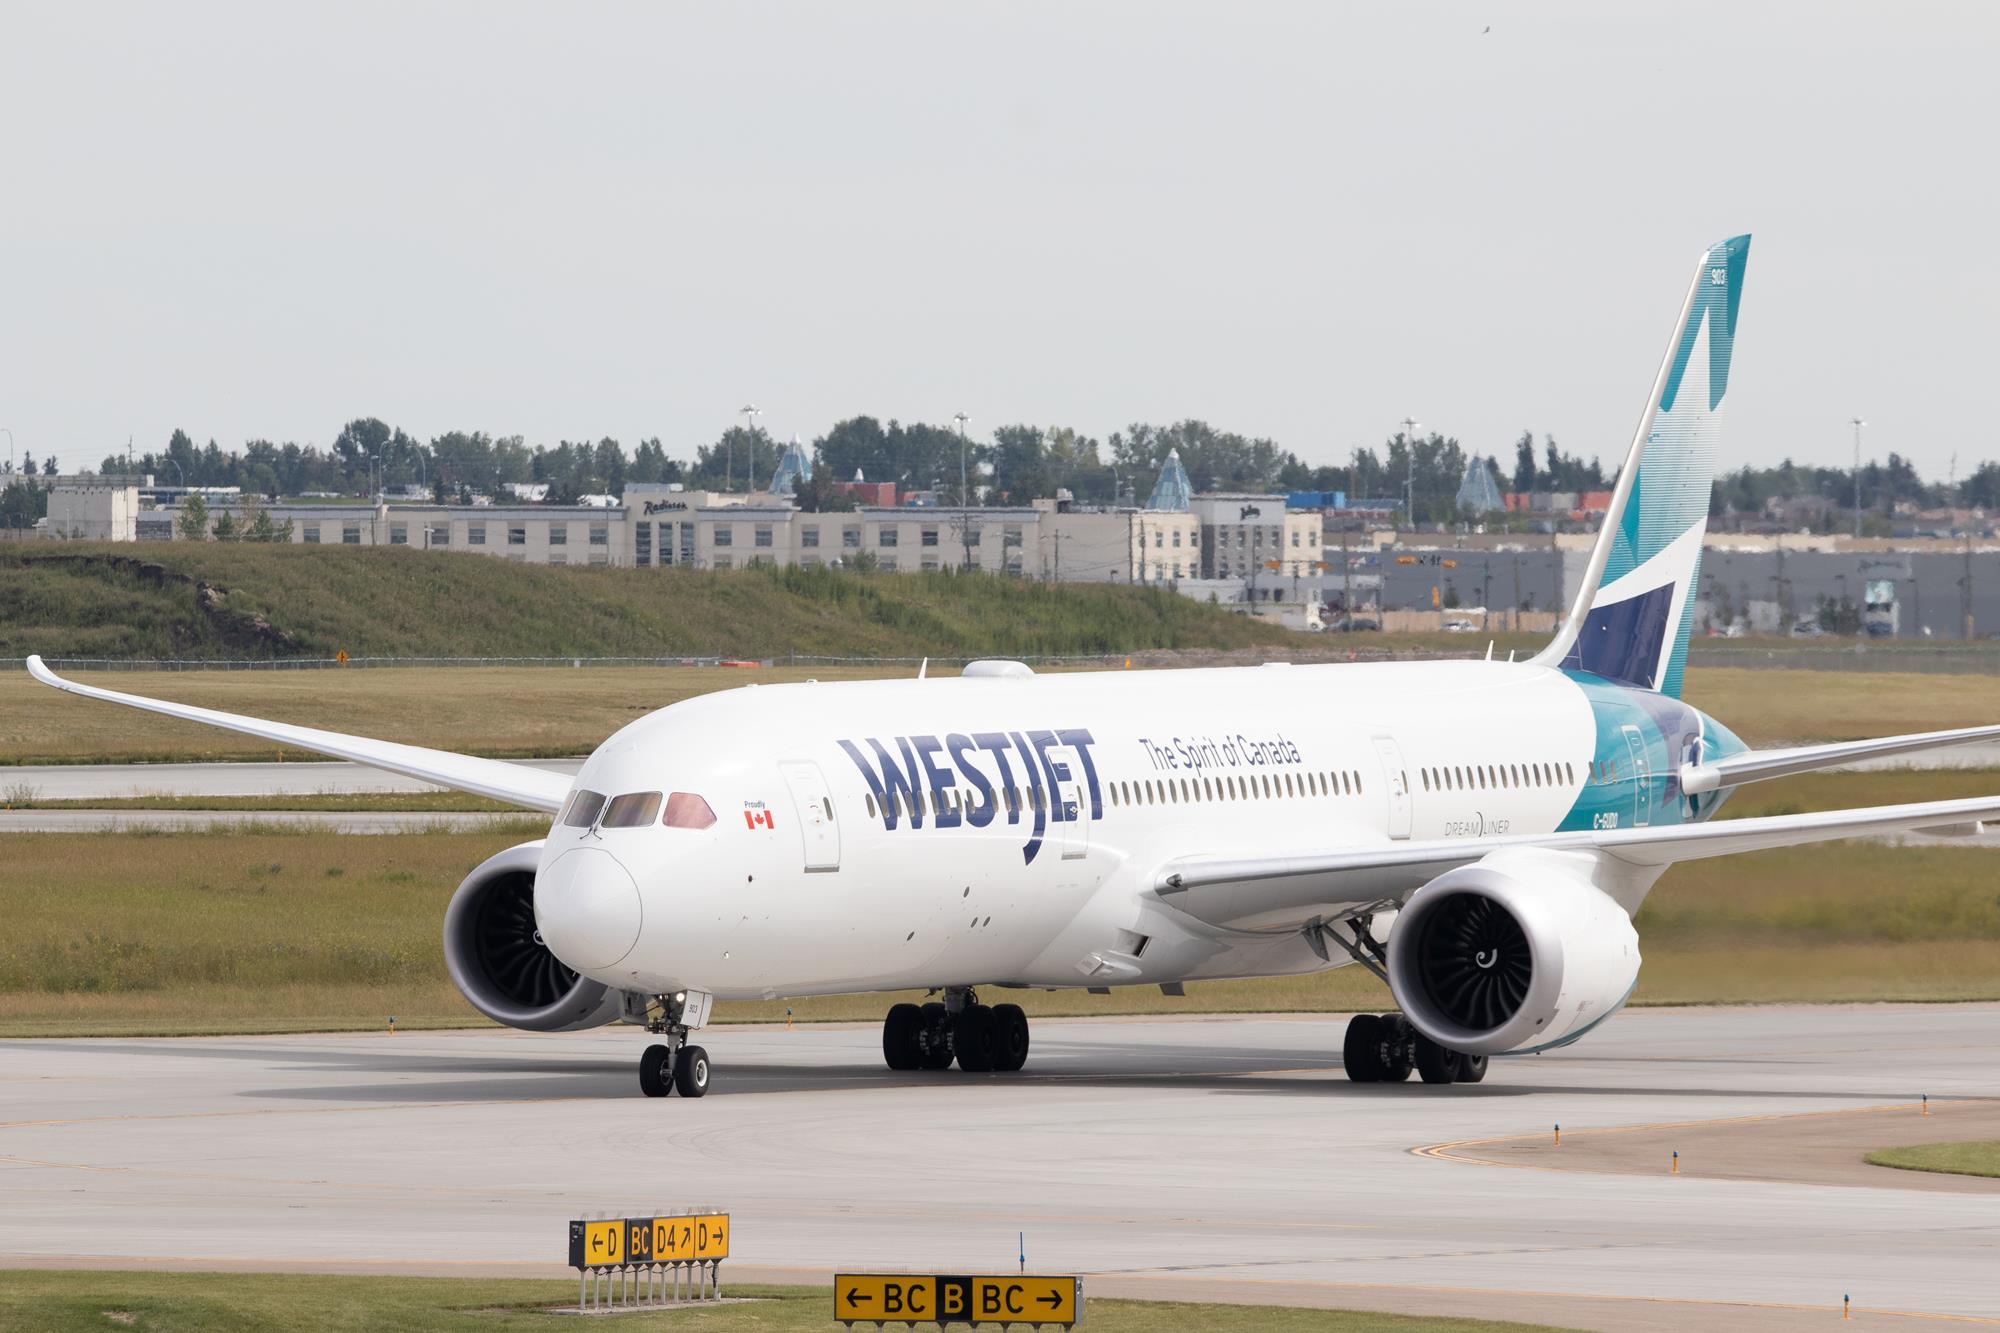 Airfare to leisure destinations to cost less this winter, WestJet CEO says